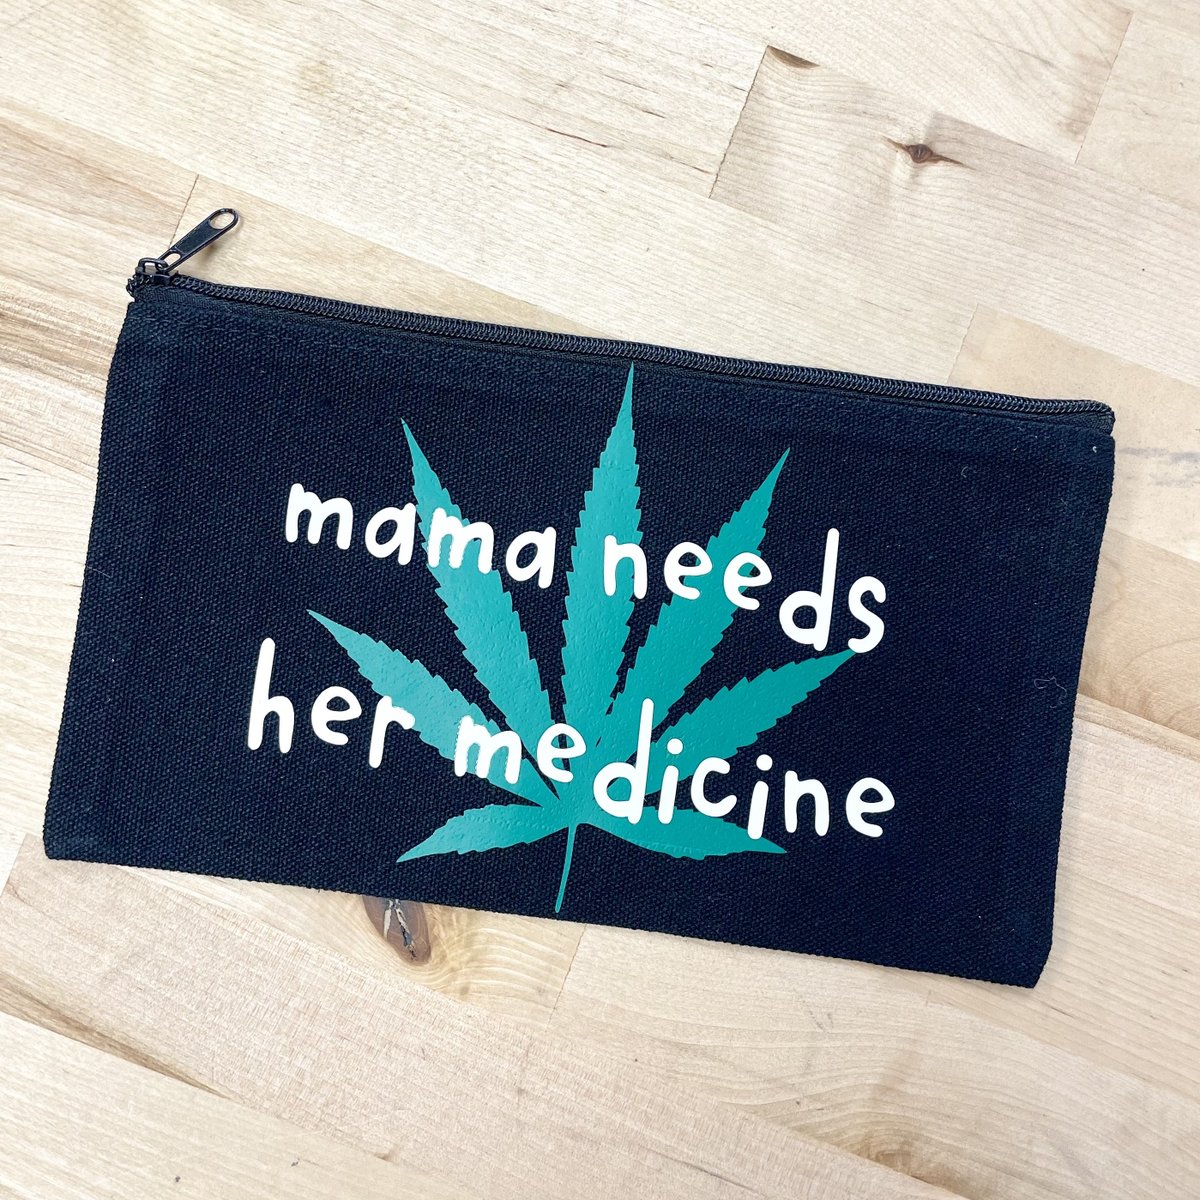 Excited to share the latest addition to my #etsy shop: Mama needs her medicine, Zipper Pouch etsy.me/3MTwFWL #beige #green #weedbag #bridalshower #bacheloretteparty #makeupbag #cosmeticbag #giftforher #zipperpouch